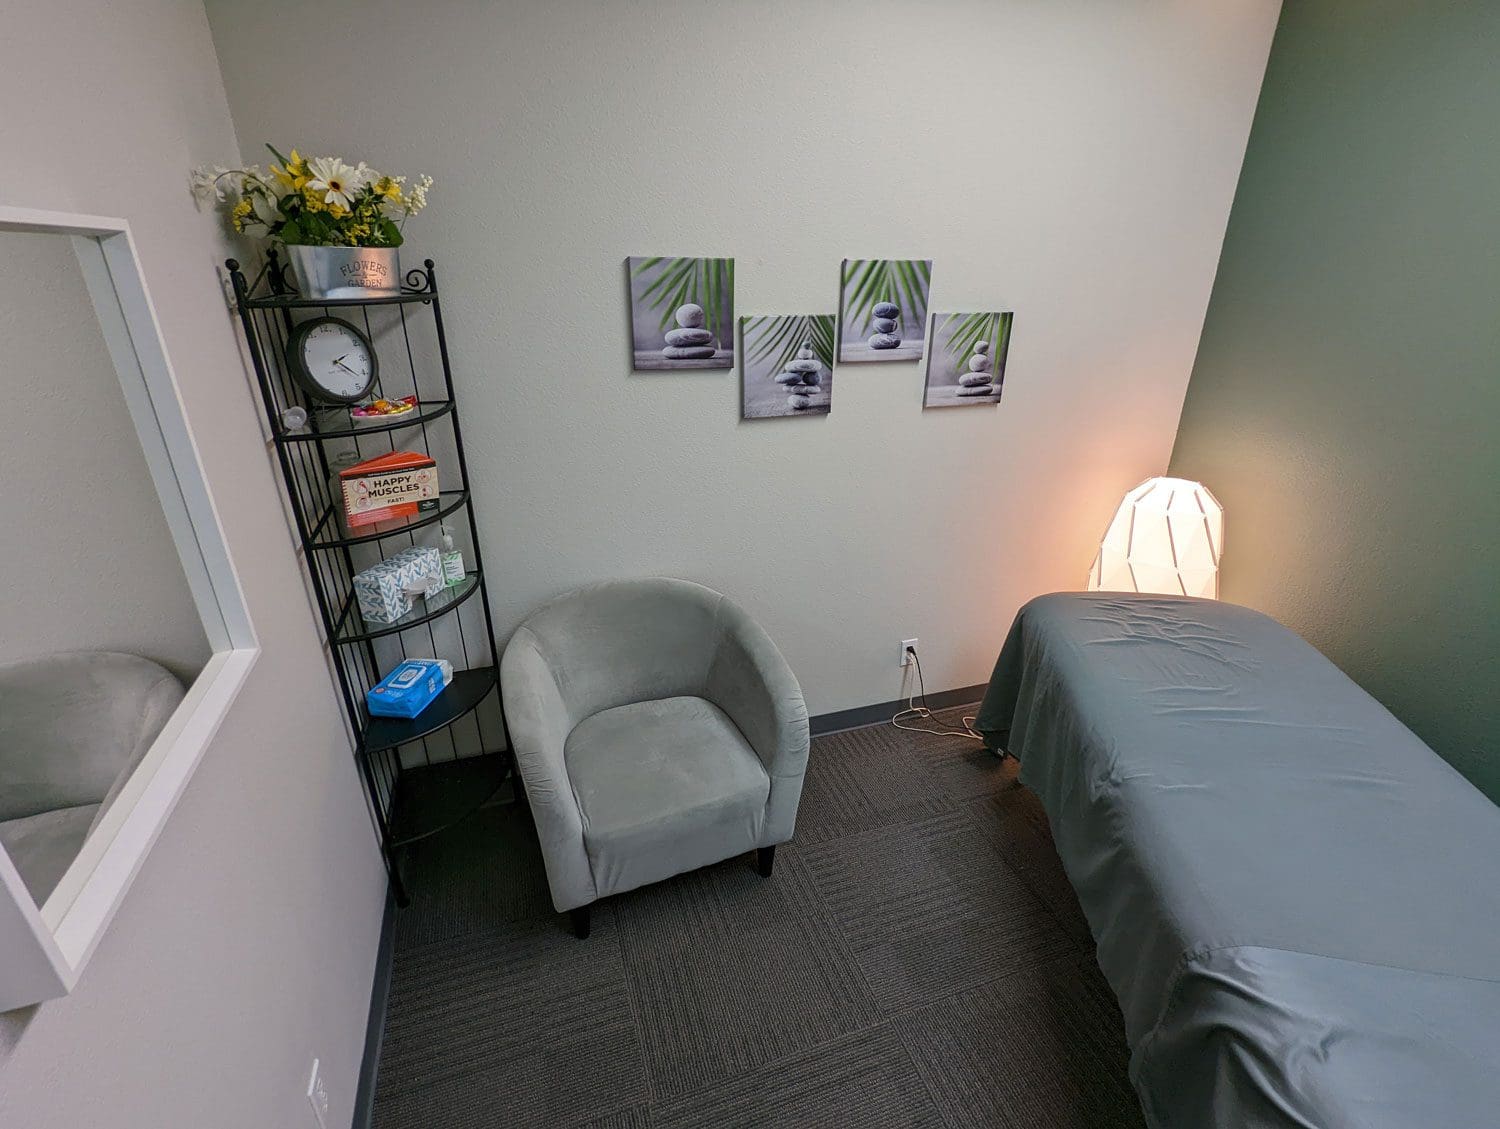 Woodburn massage therapy room with massage table and sitting chair.